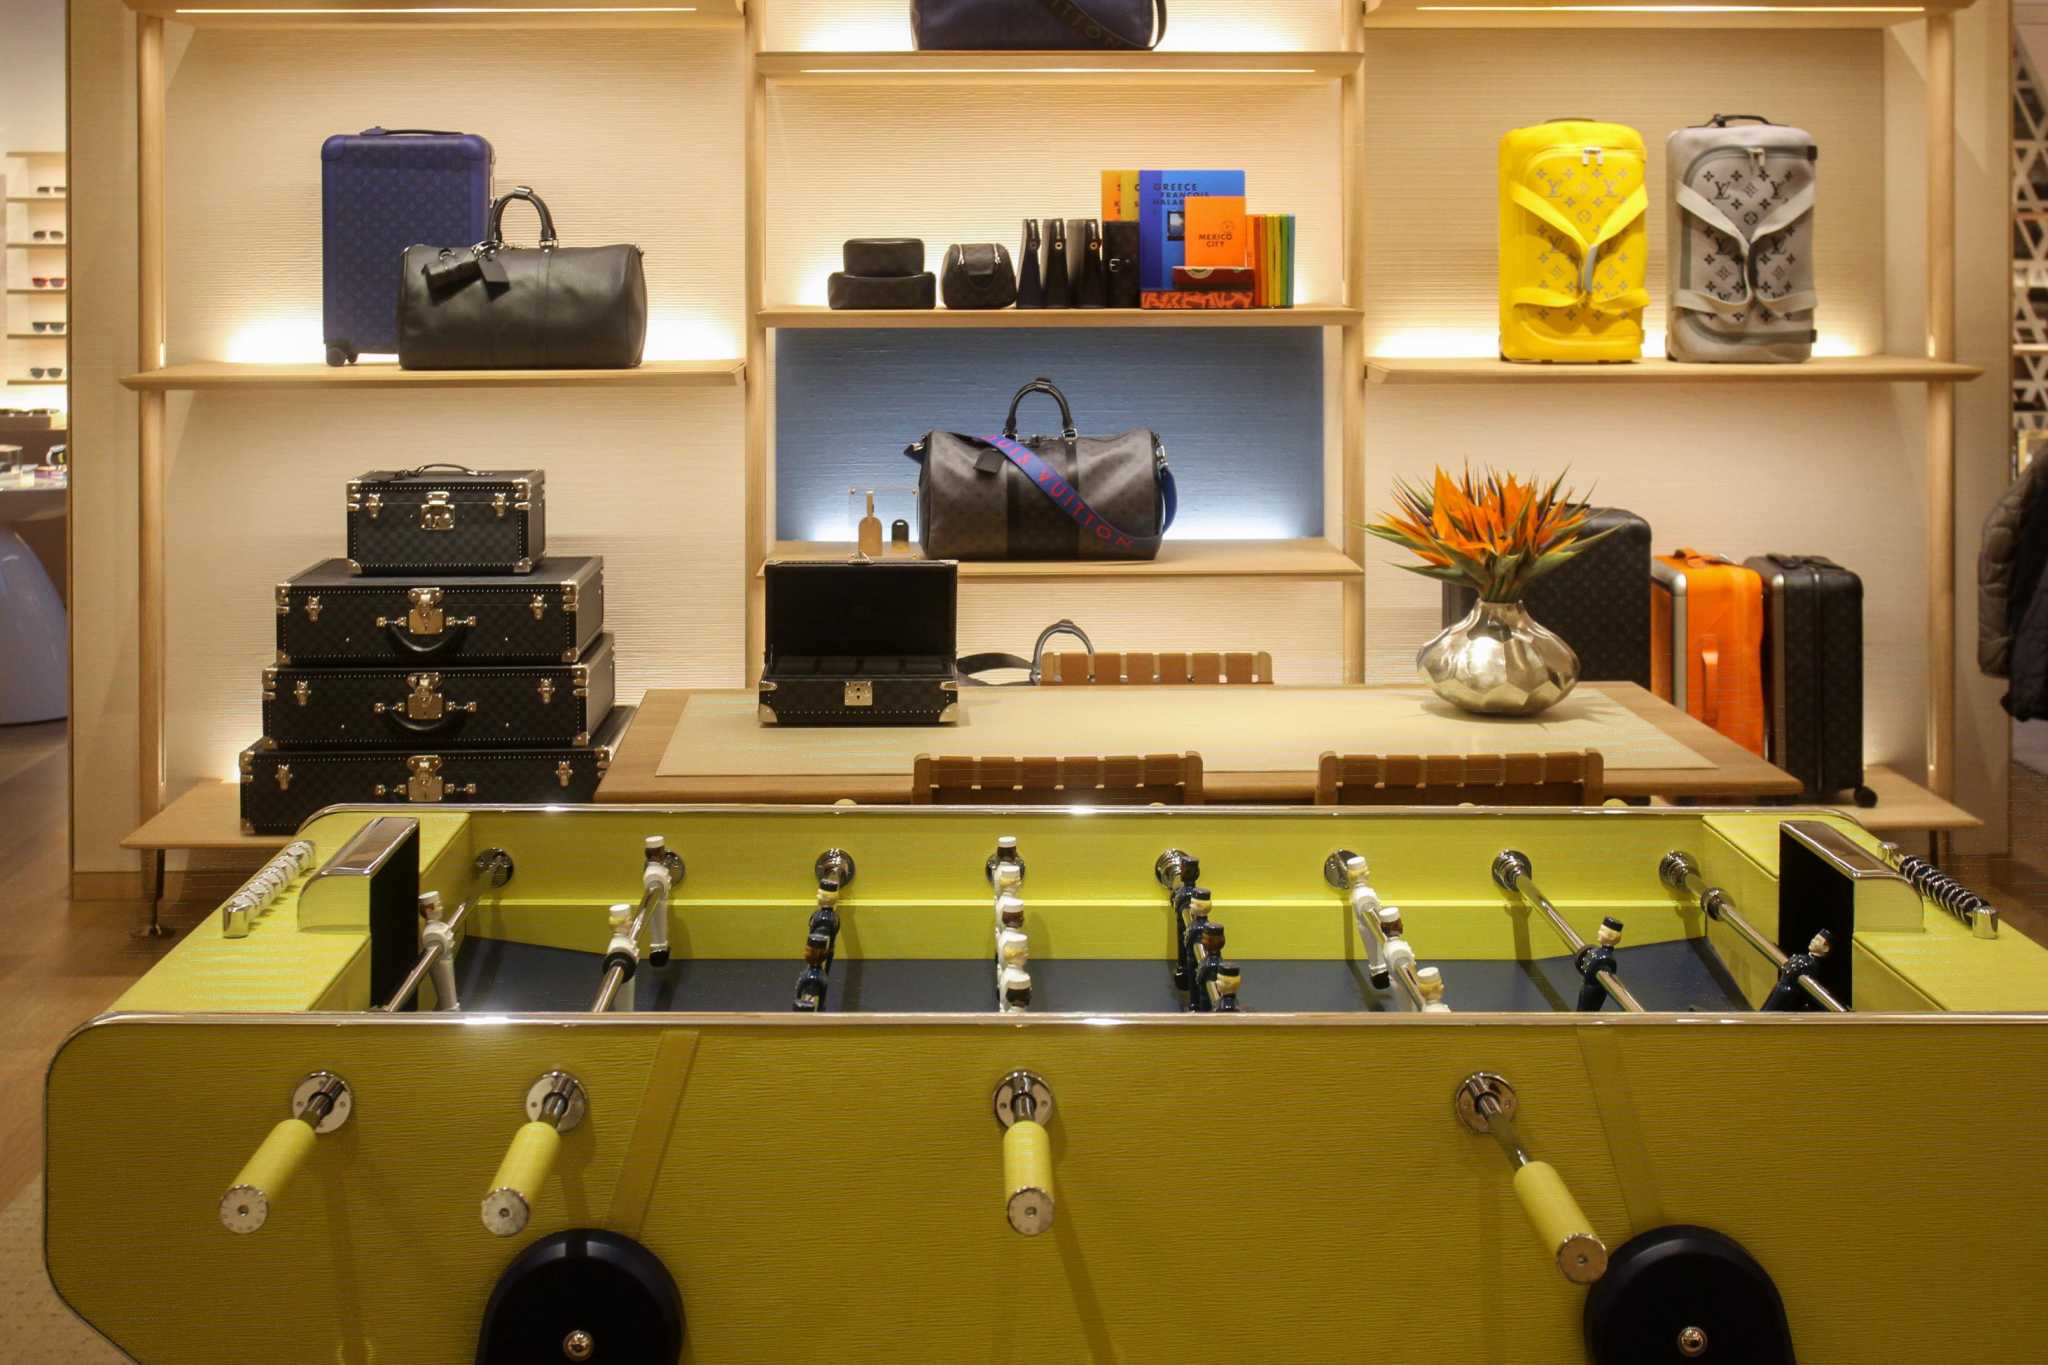 Inside the largest Louis Vuitton men's store in the United States